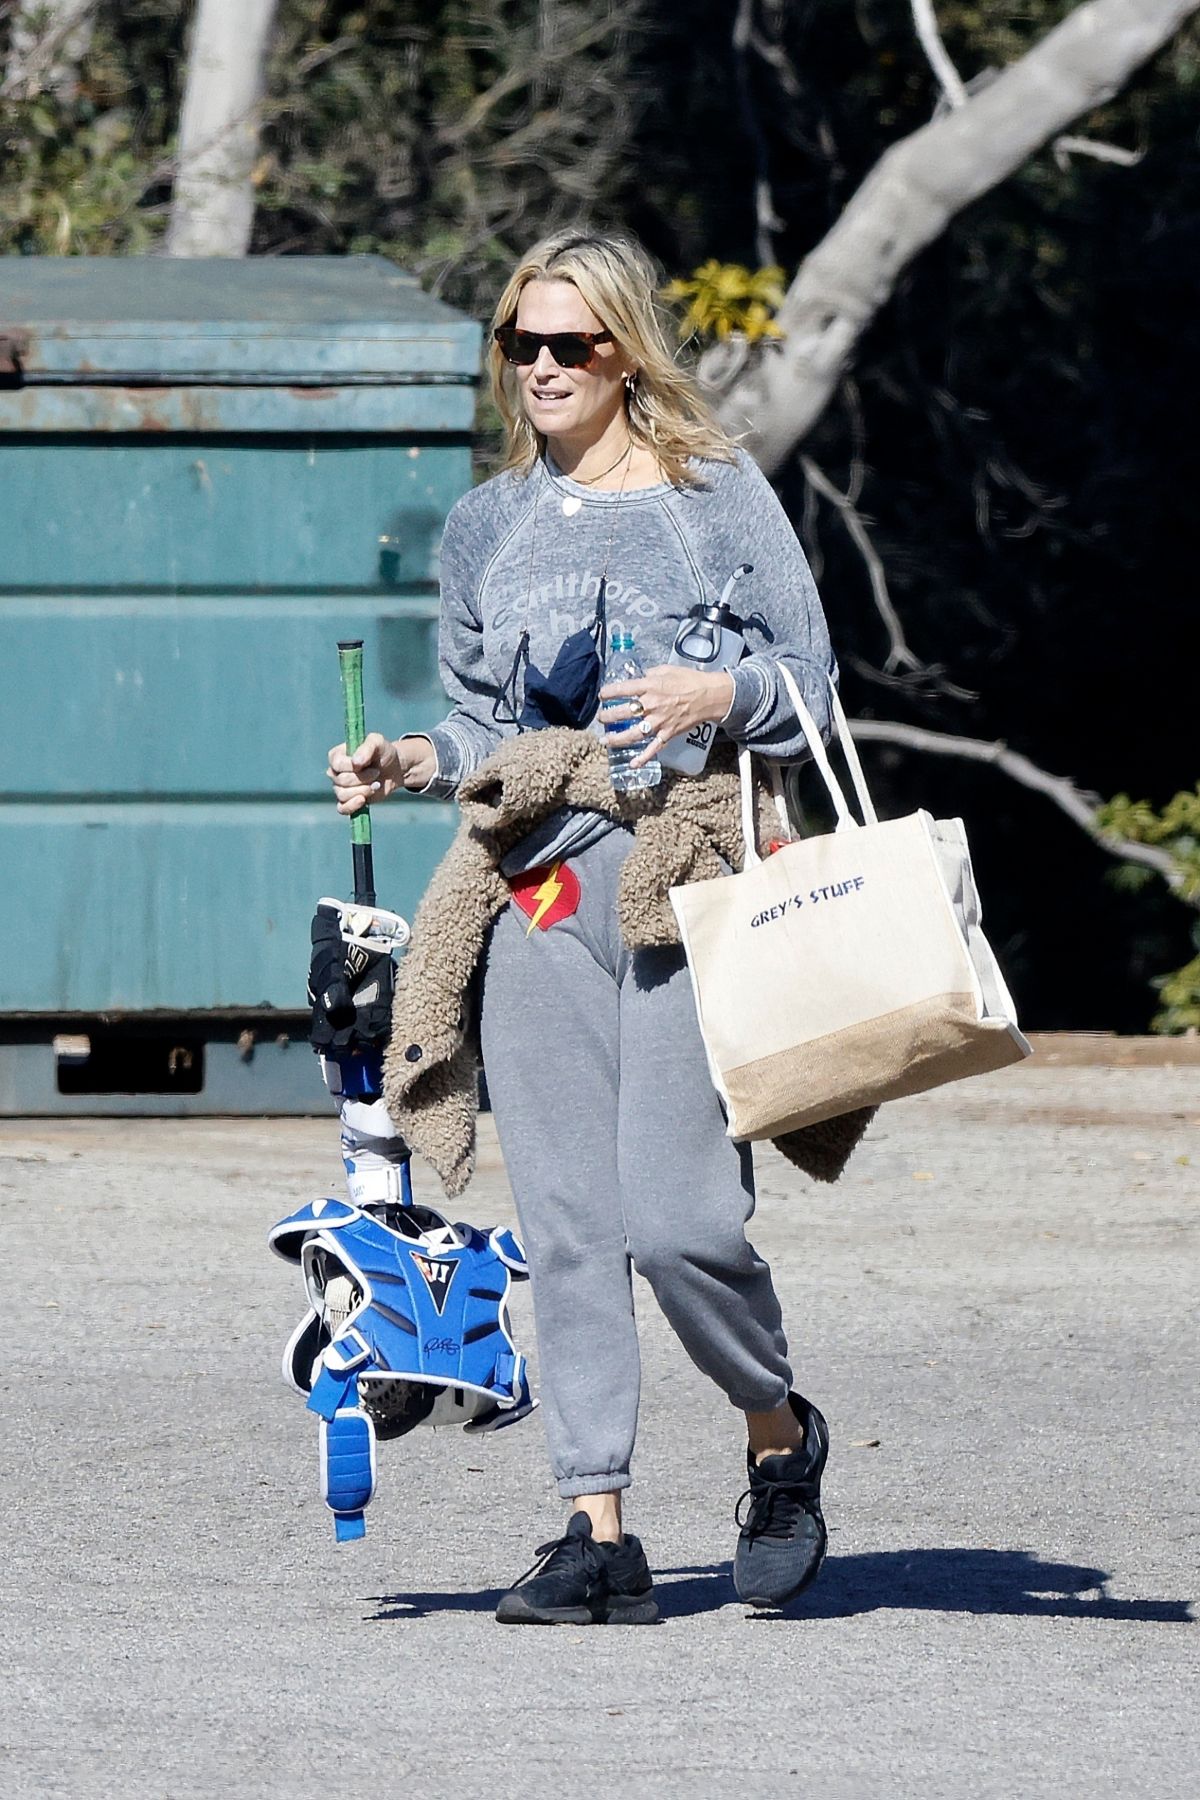 molly-sims-at-a-softball-class-in-pacific-palisades-01-24-2021-6.jpg